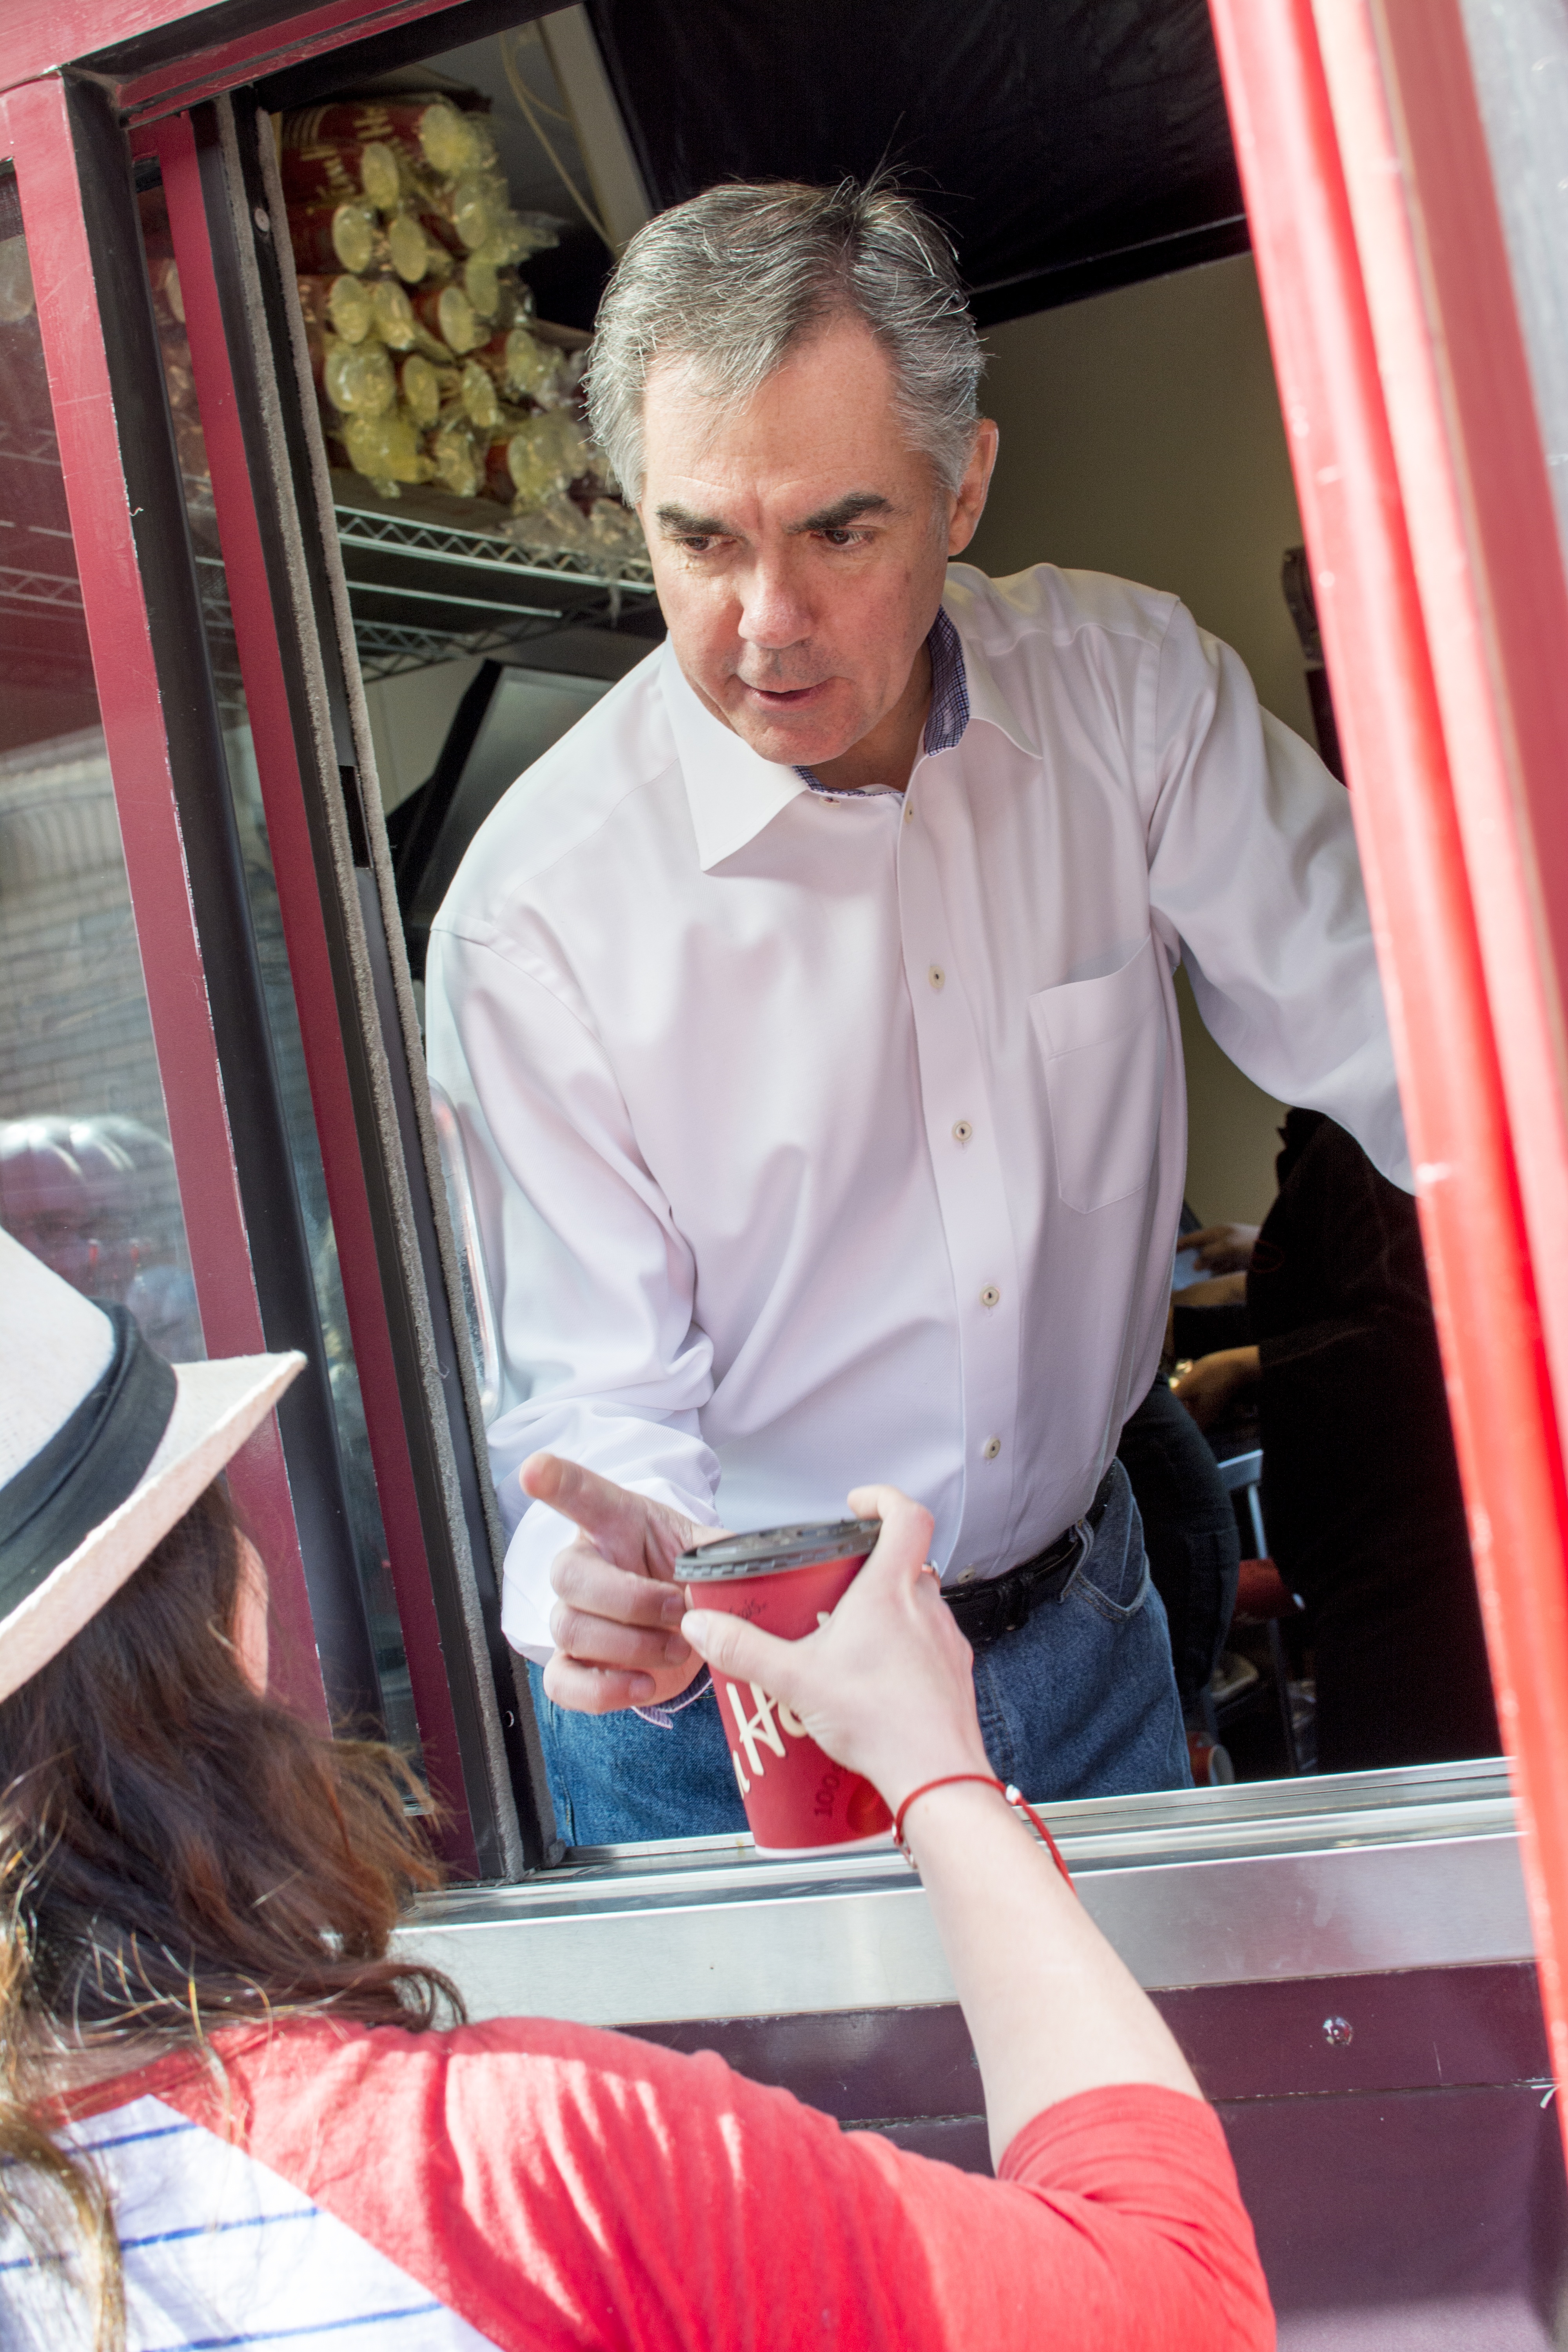 COFFEE CHAT – Premier Jim Prentice was recently in Red Deer to pour coffee for patrons at the Gasoline Alley Tim Hortons during a campaign stop.